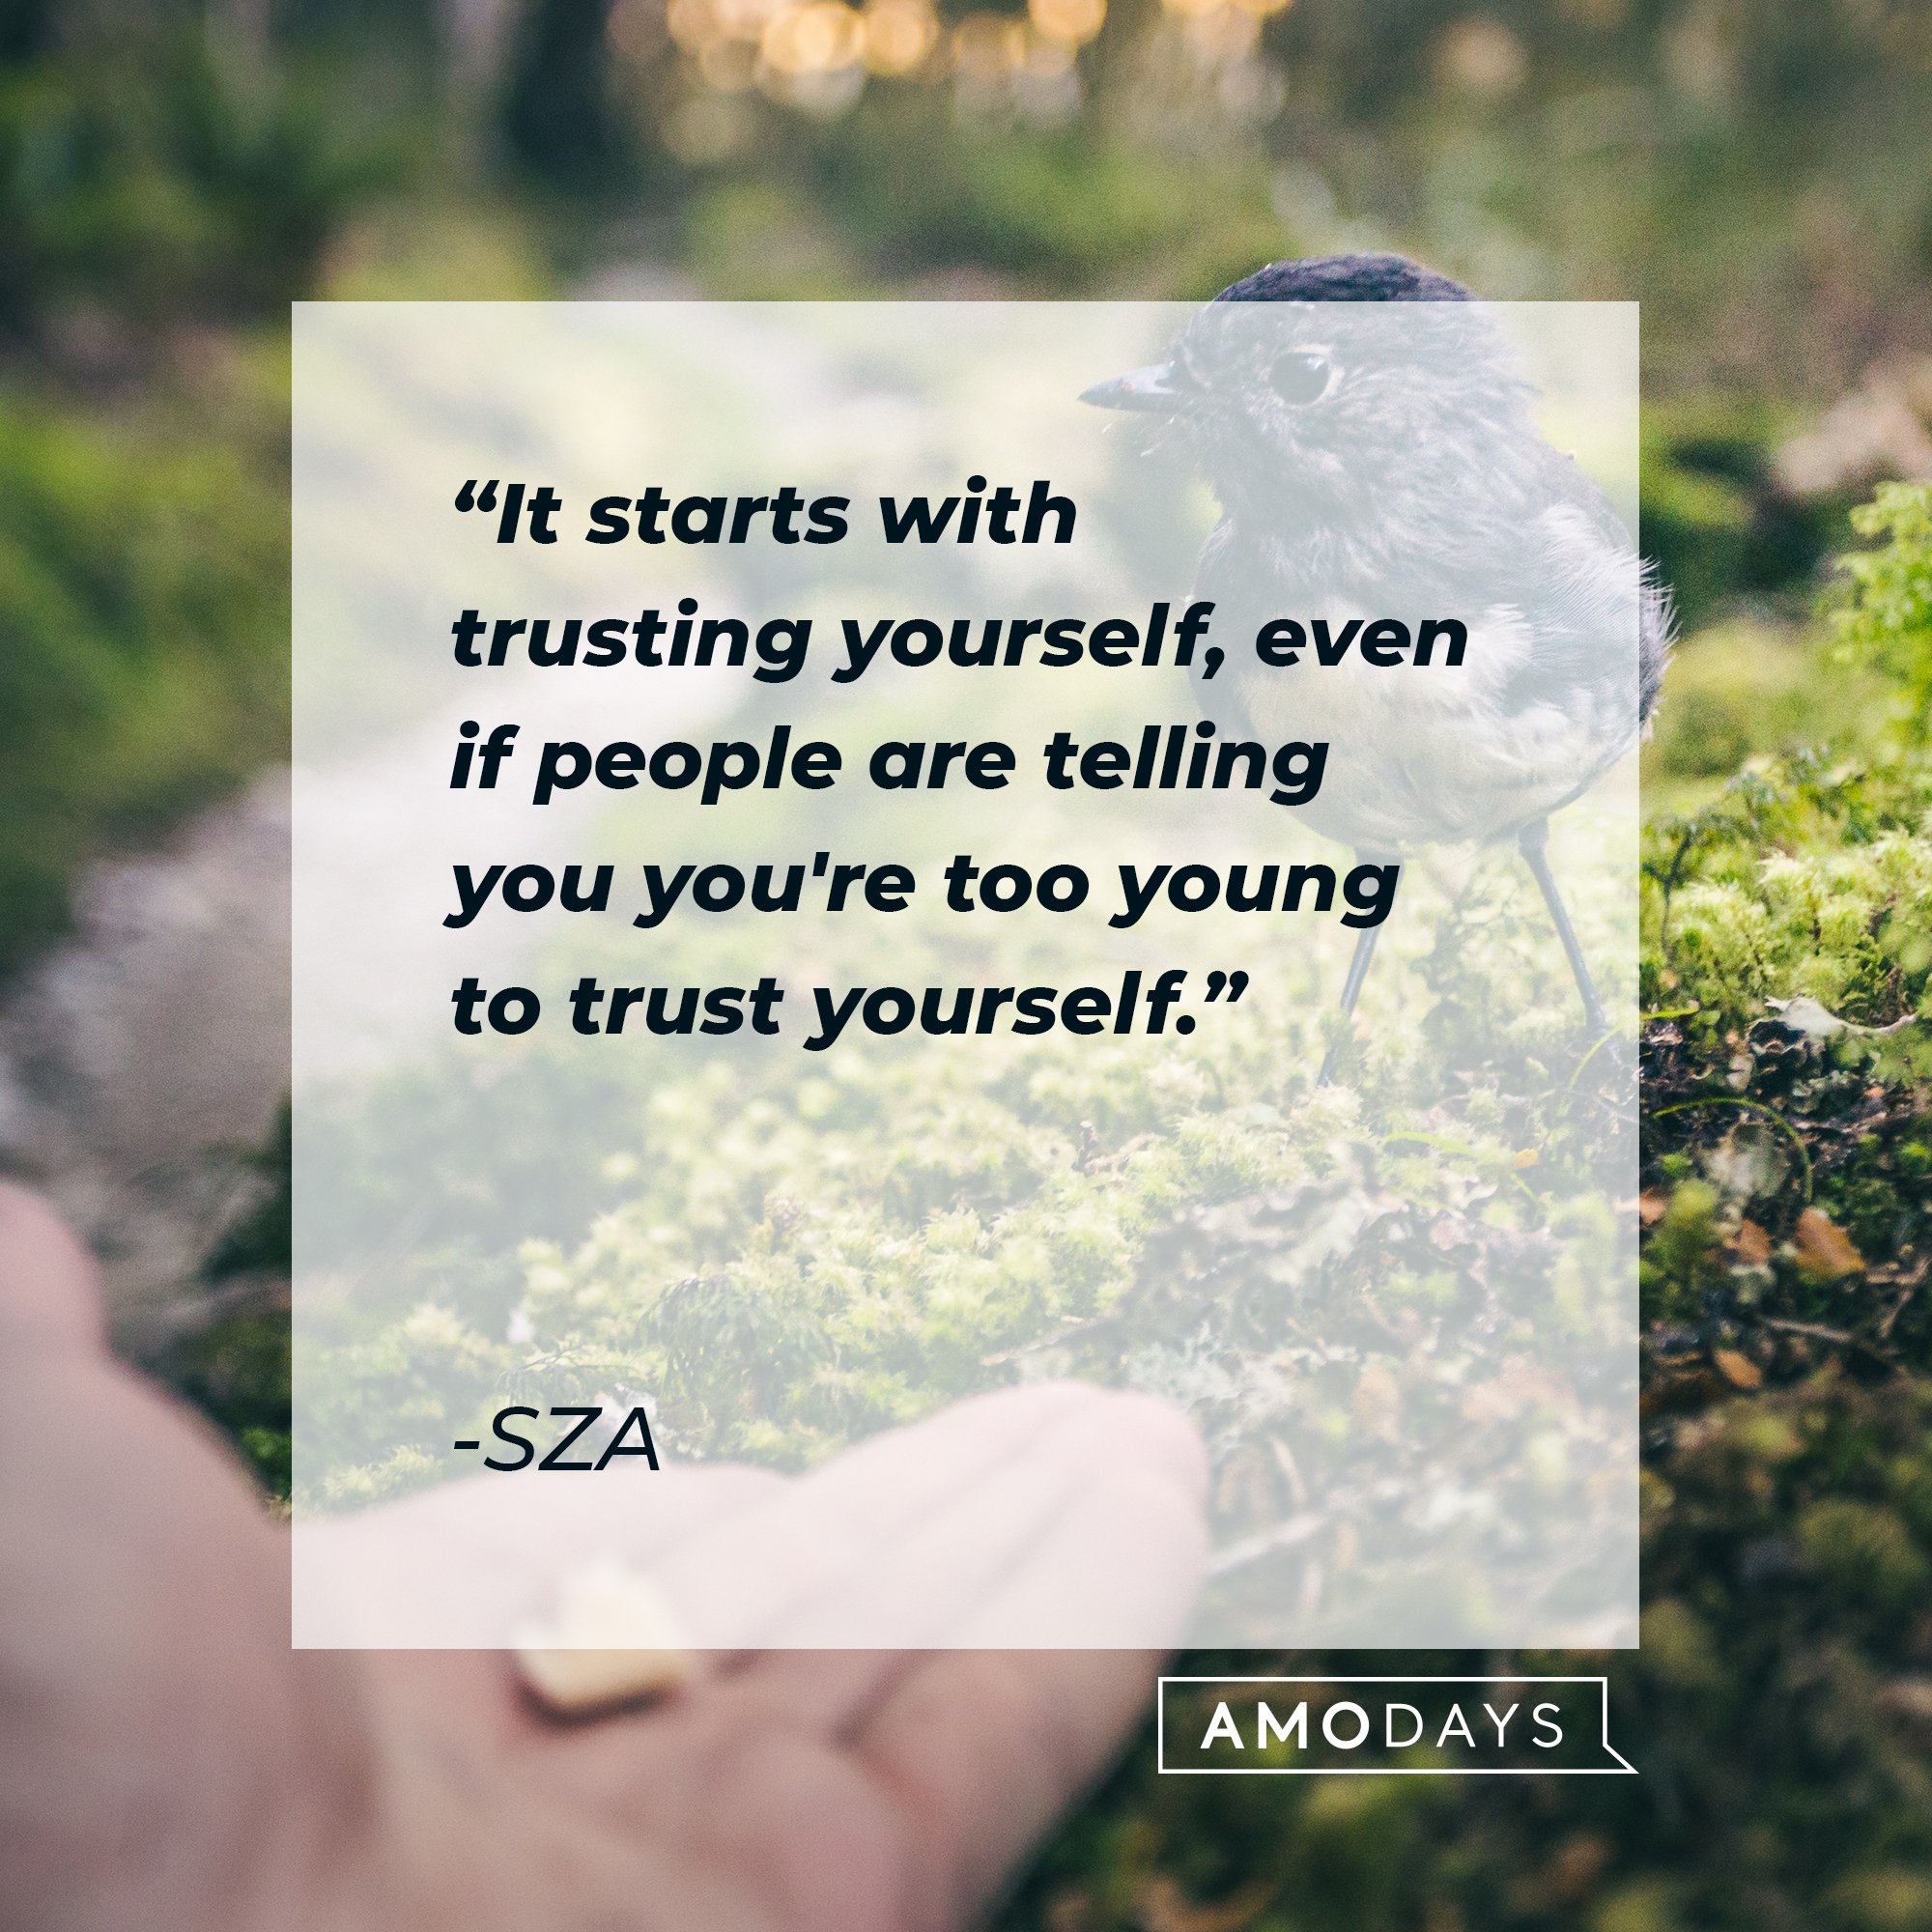 SZA’s quote: "It starts with trusting yourself, even if people are telling you you're too young to trust yourself." | Image: AmoDays